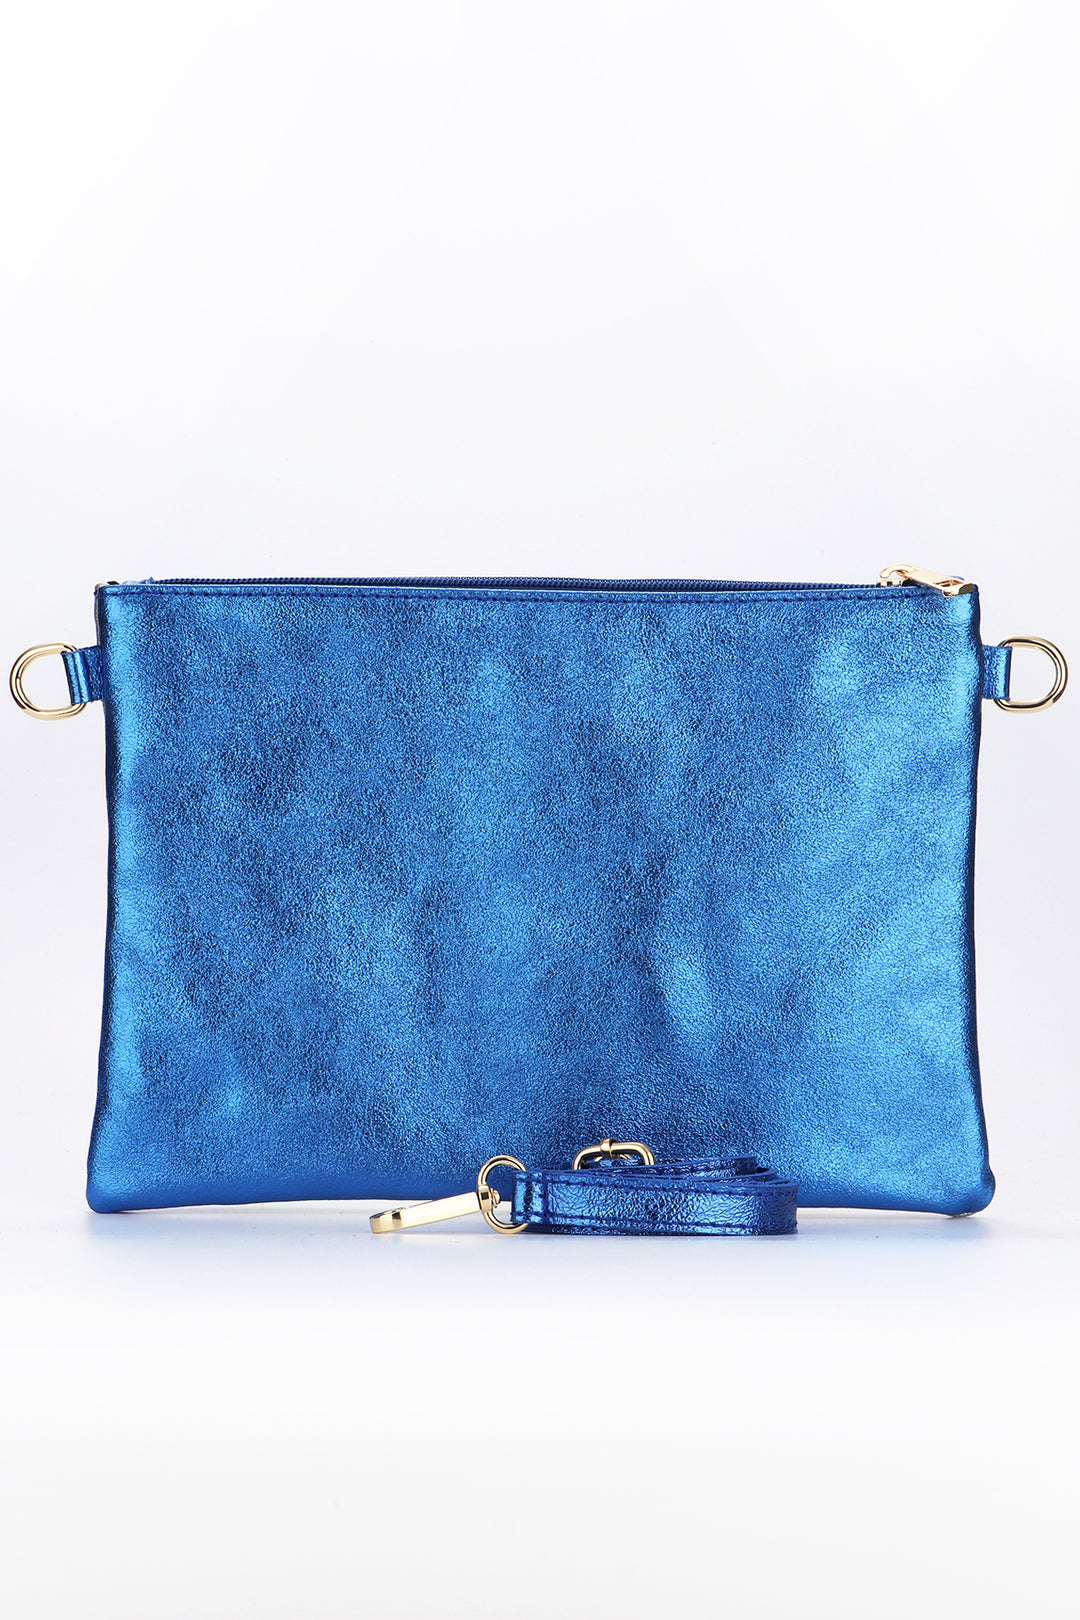 the back of the clutch bag is a solid royal blue, the bag has a zip closure compartment